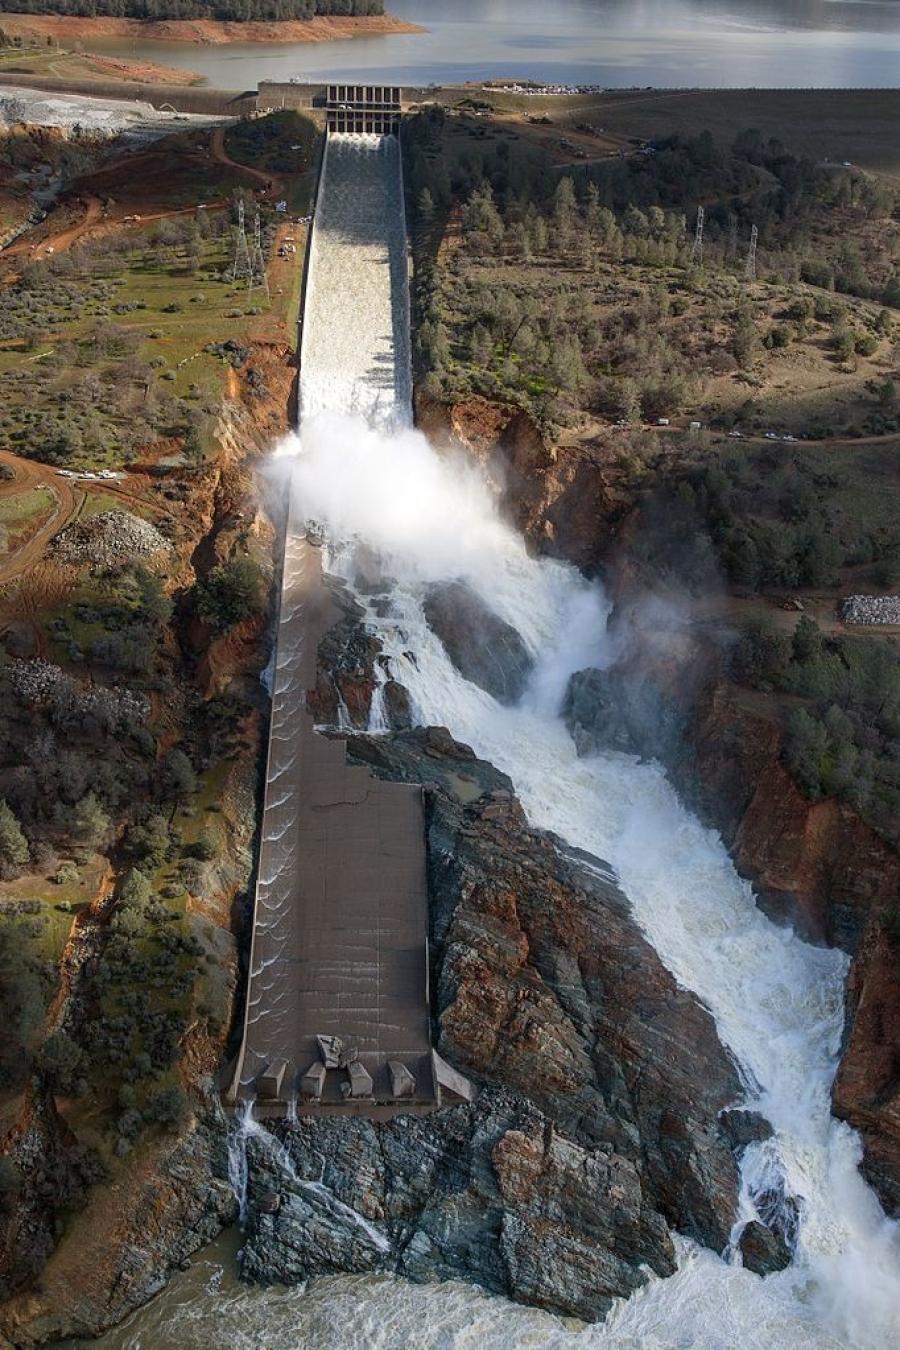 Spillways on the Oroville Dam crumbled and fell away during heavy rains in February 2017, forcing nearly 200,000 people to evacuate amid fears the dam would collapse. Disaster was ultimately averted, but the dam needed significant repair.